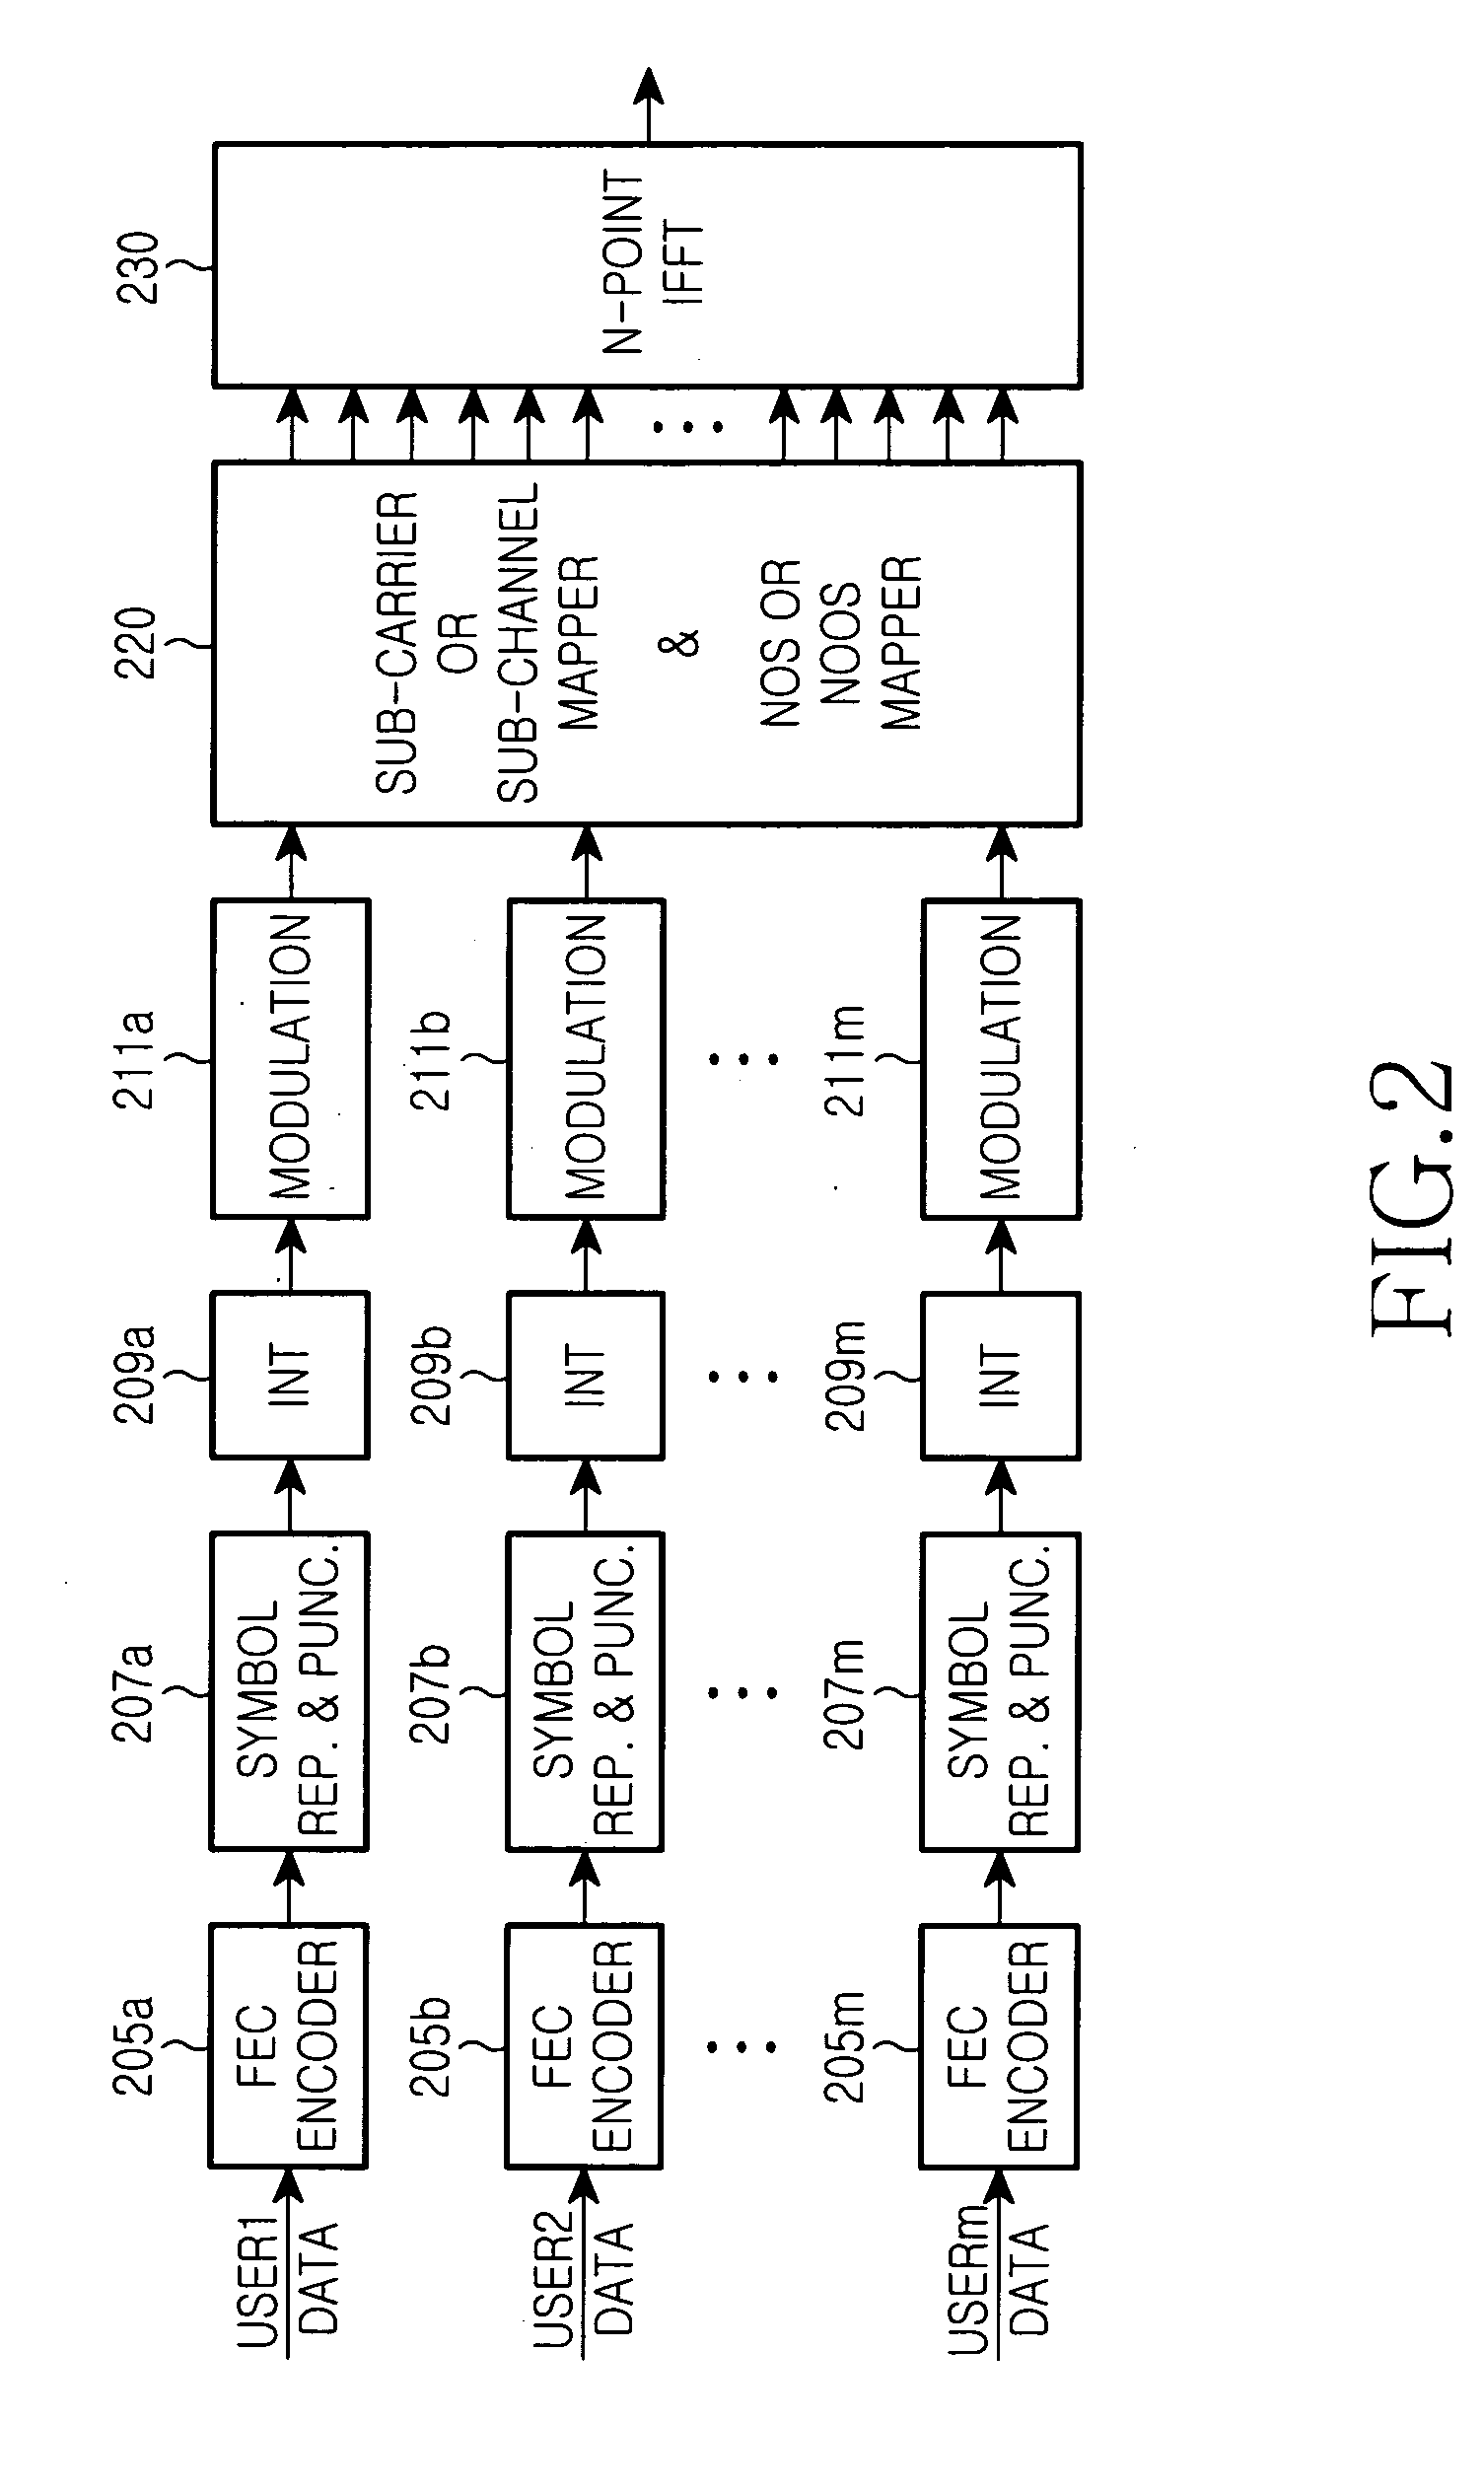 Apparatus and method for generating and decoding forward error correction codes having variable rate in a high-rate wireless data communication system